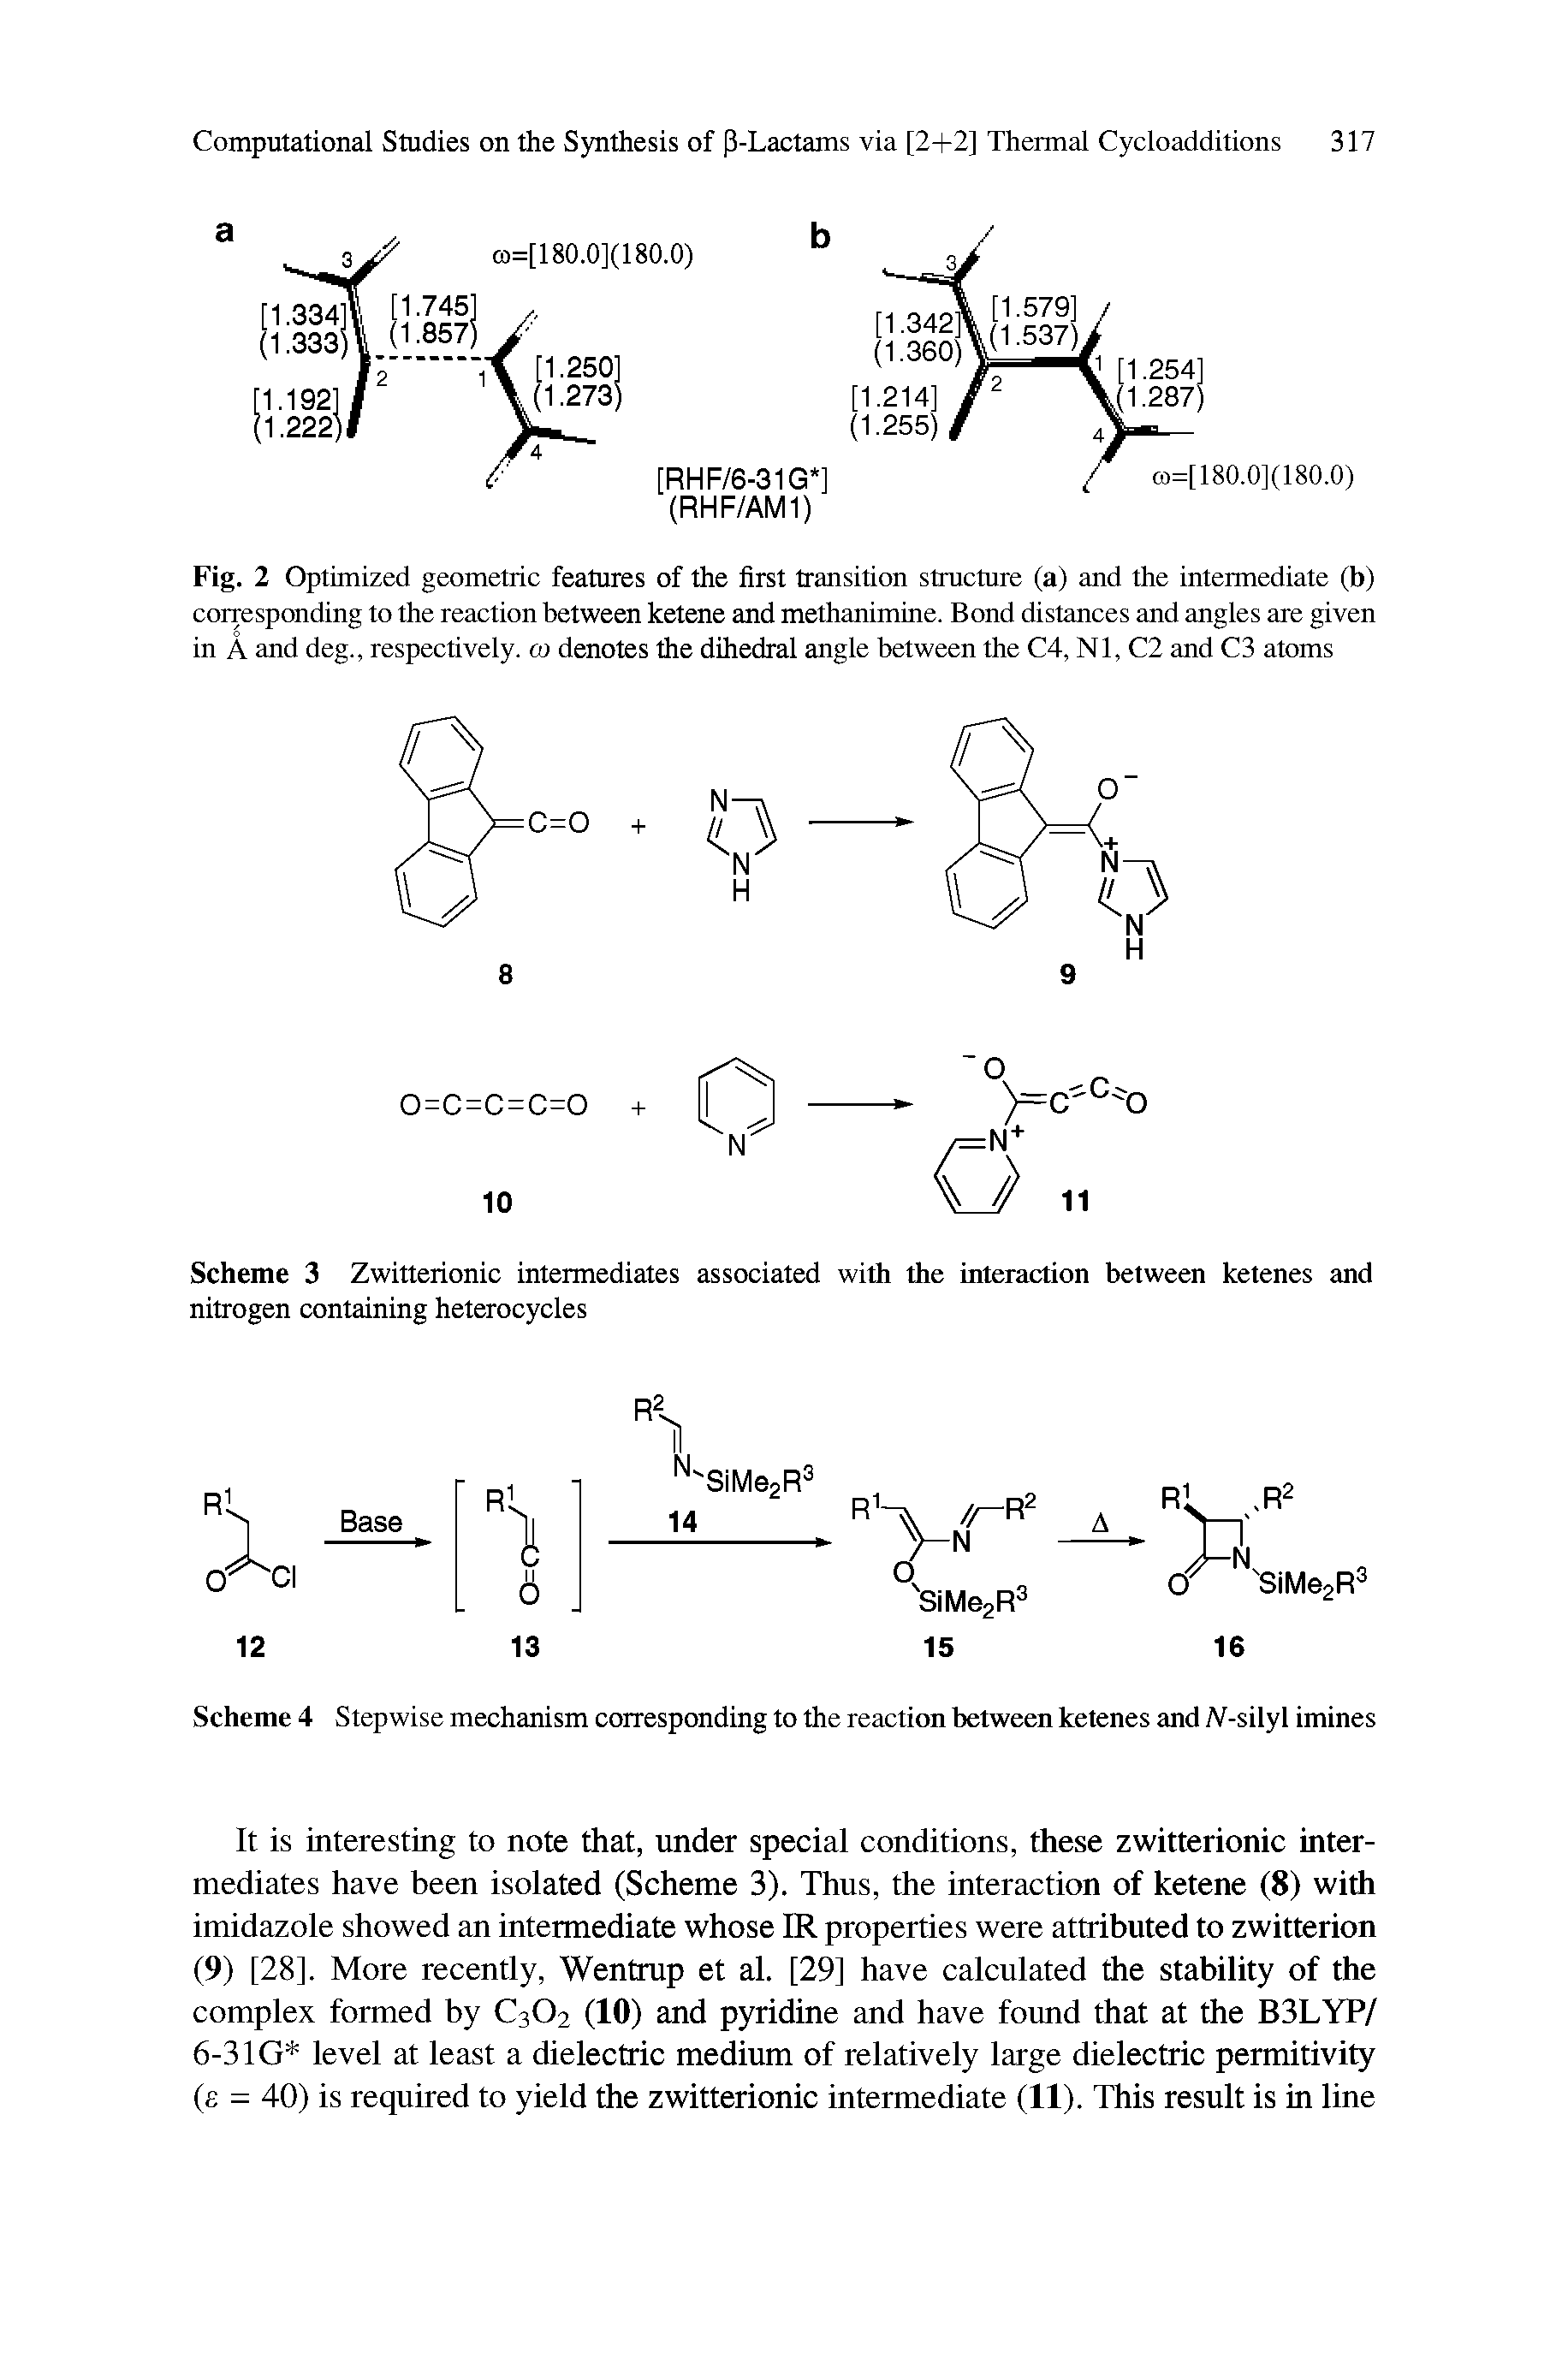 Scheme 4 Stepwise mechanism corresponding to the reaction between ketenes and IV-silyl imines...